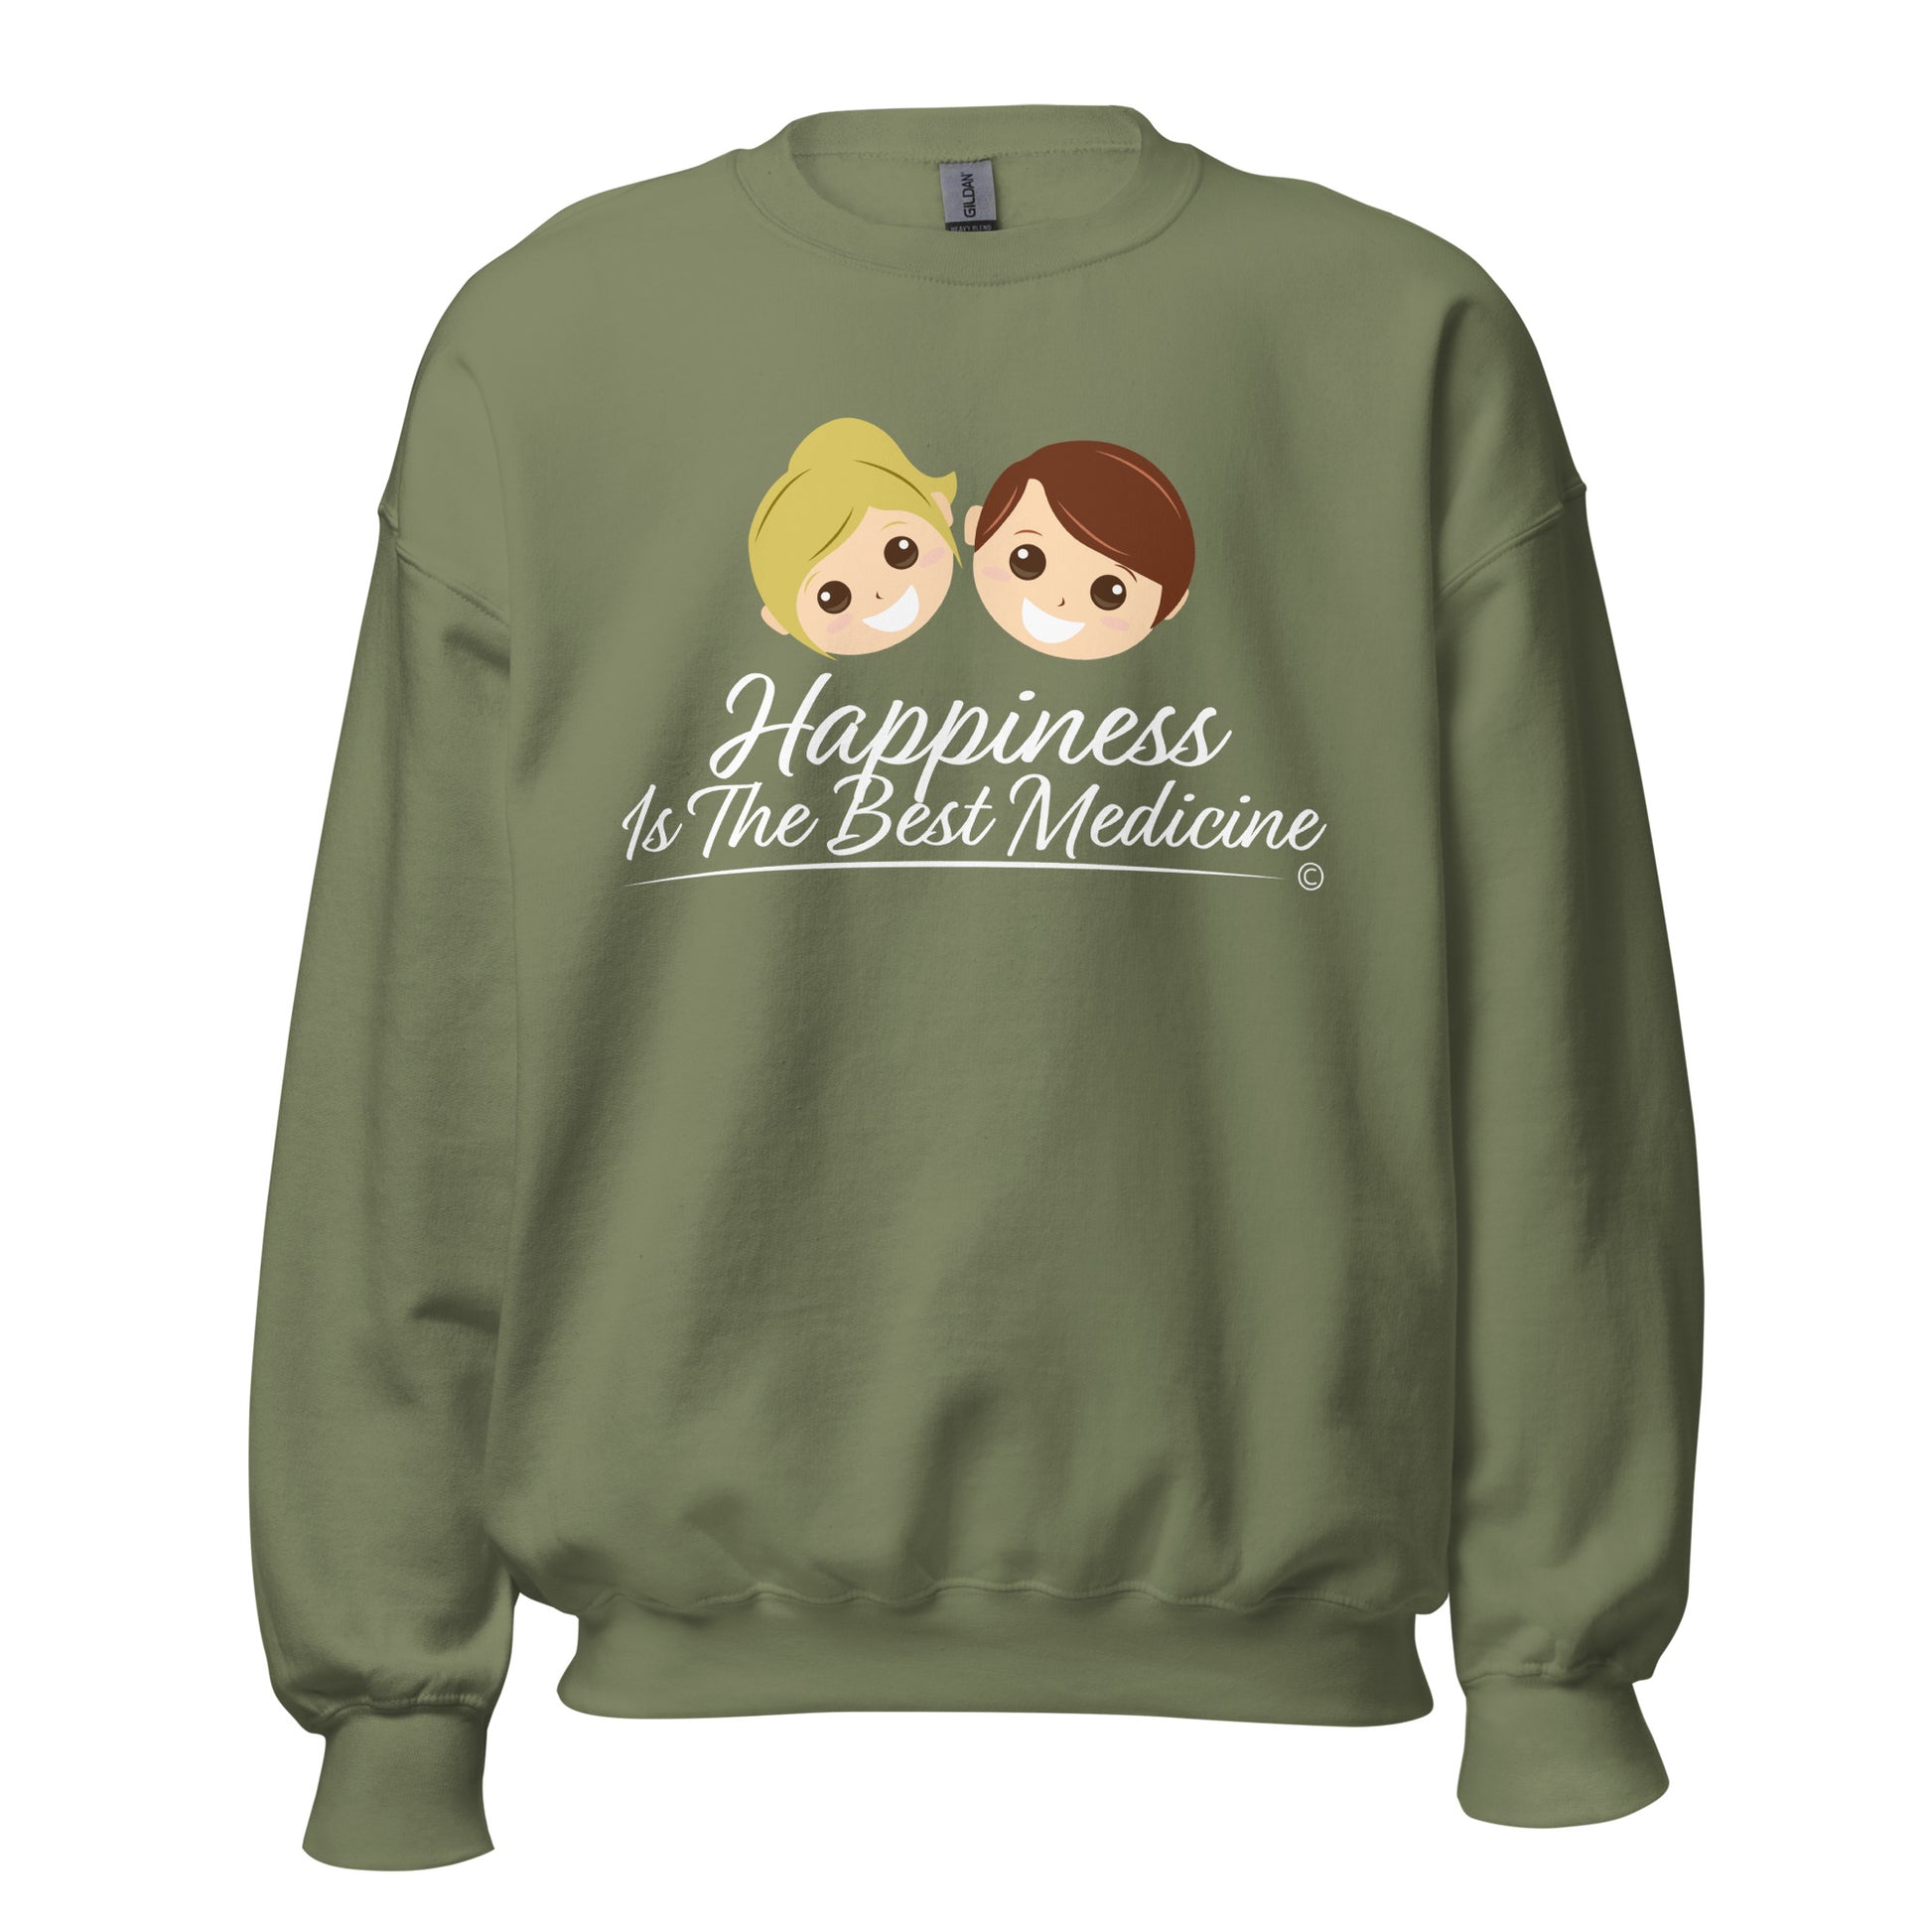 Soft and cozy sweatshirt for all -Military Green